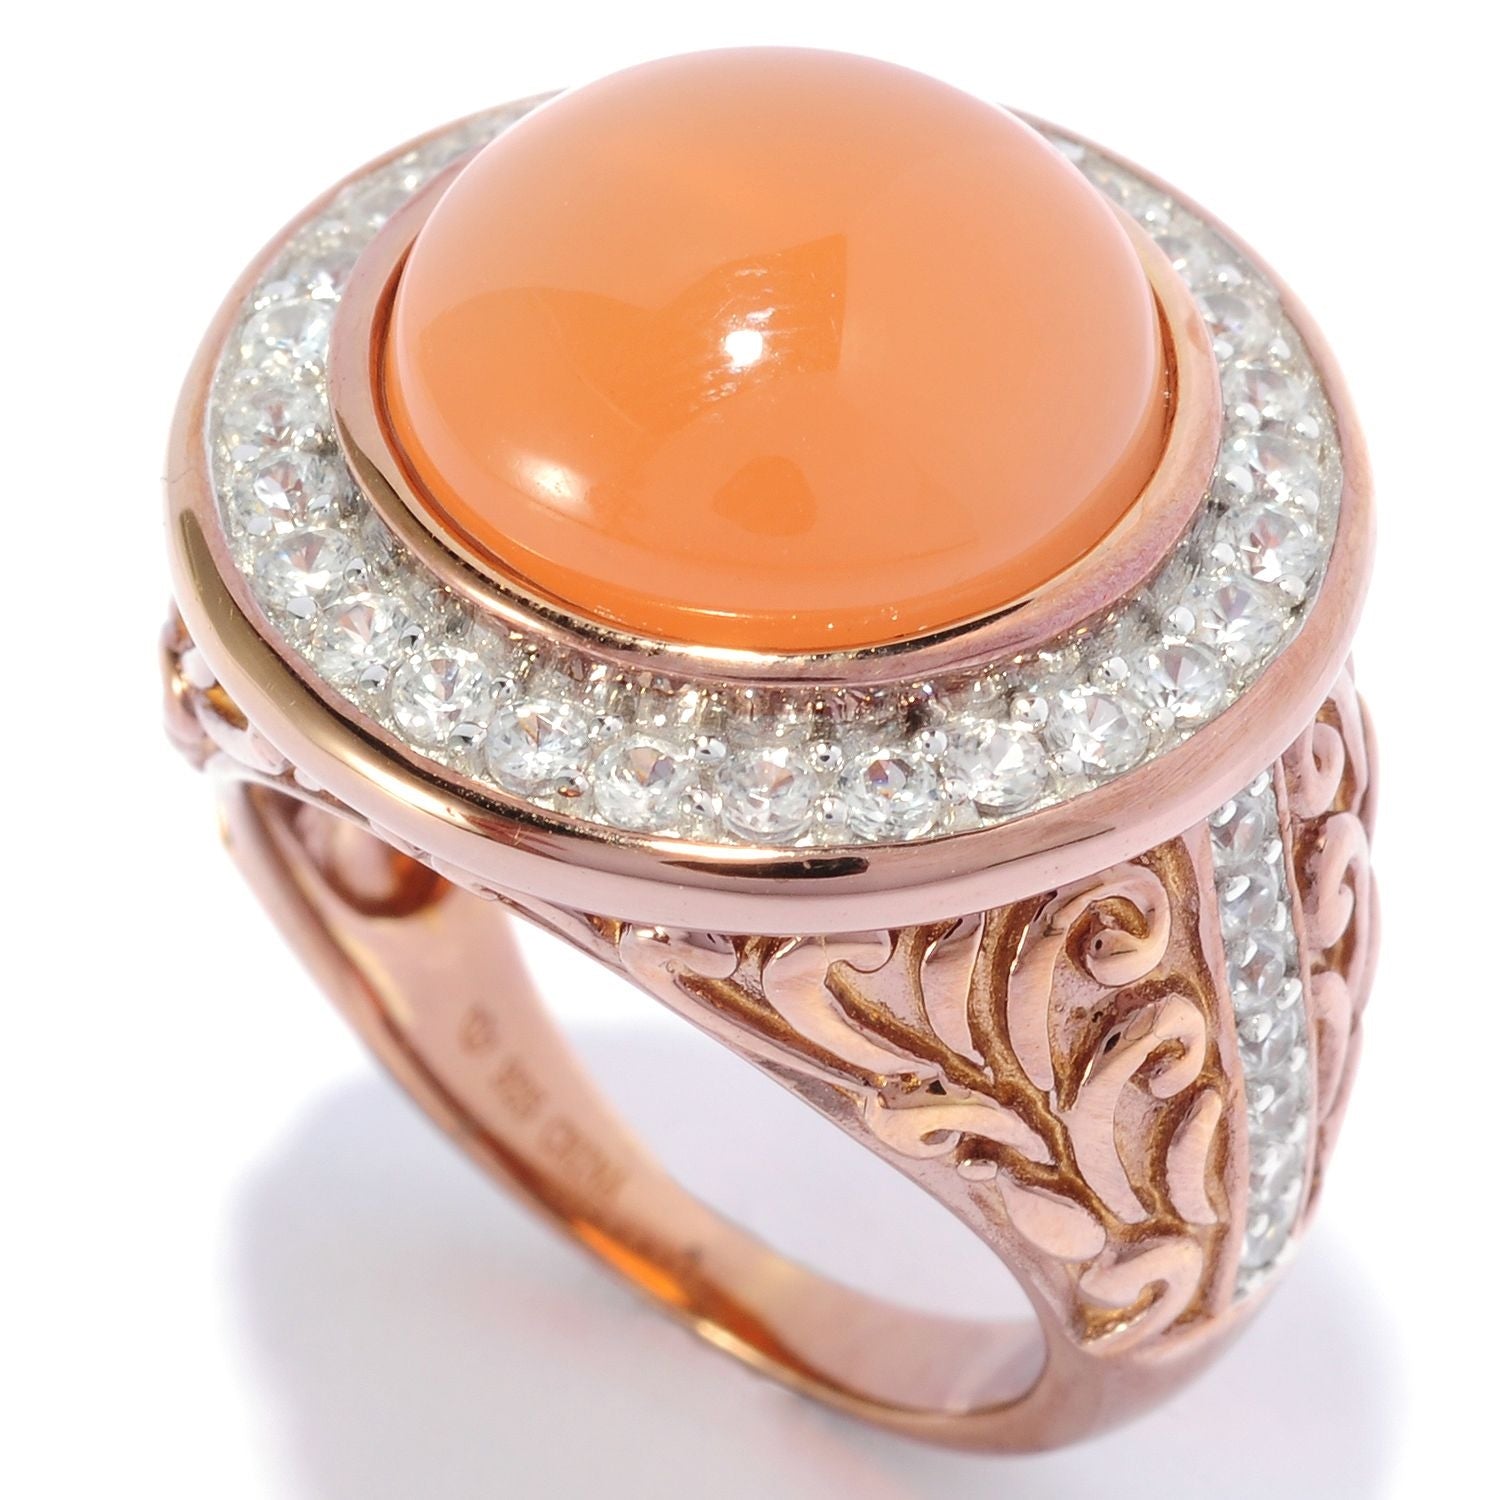 Pinctore 18K Chocolate Gold Over Silver 9.45ctw Peach Moonstone Cocktail Ring - pinctore